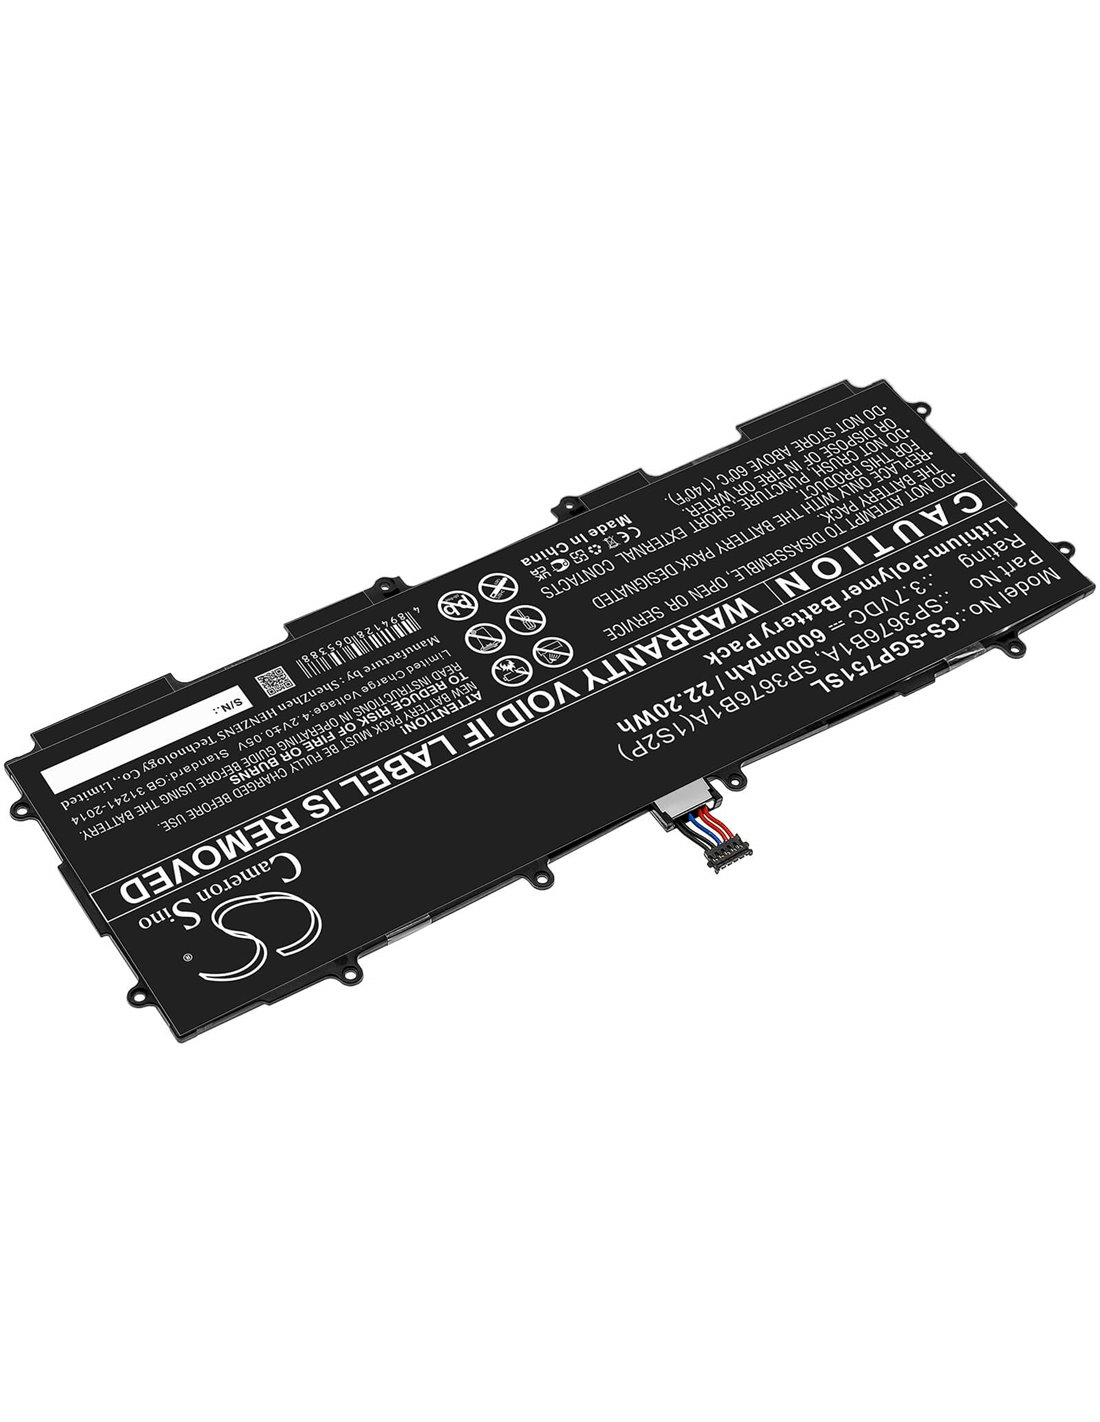 Battery for Samsung Gt-p7510, Galaxy Tab Gt-p7510, Galaxy Note 10.1 LTE, 3.7V, 6000mAh - 22.20Wh